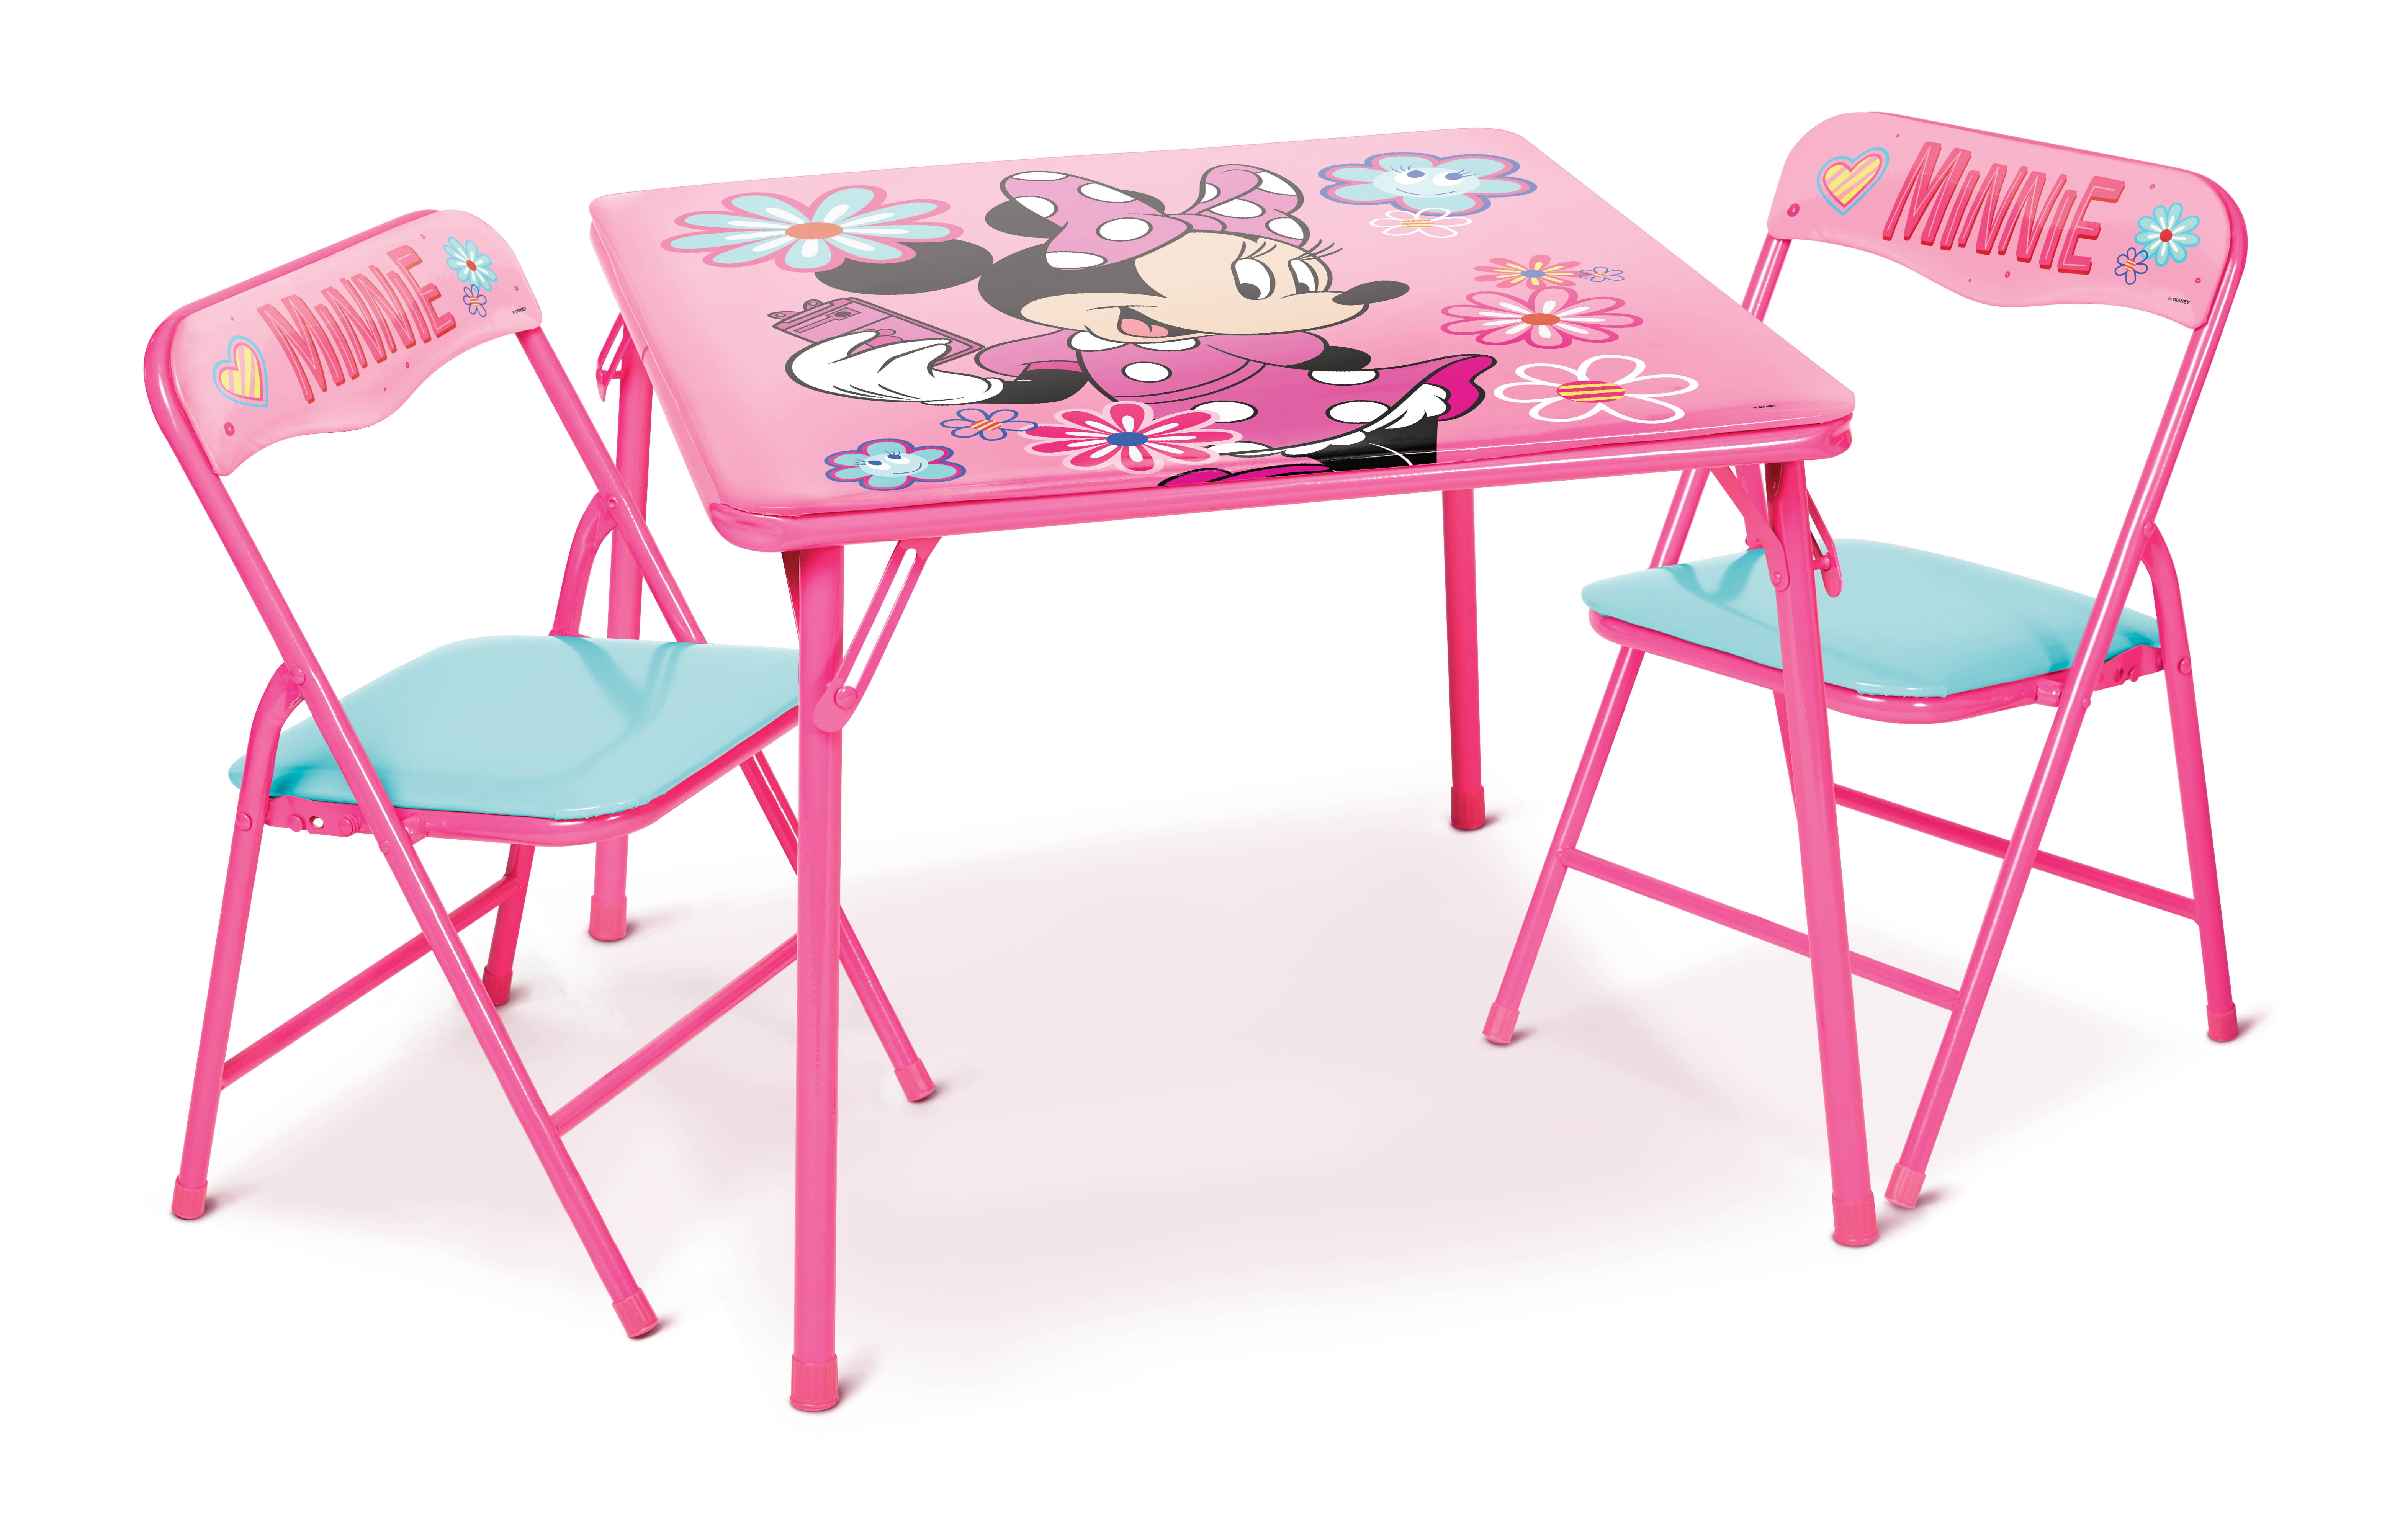 Kids Activity Desk Set Chair Seat Interactive Touch Learn Draw Write Sing Pink 